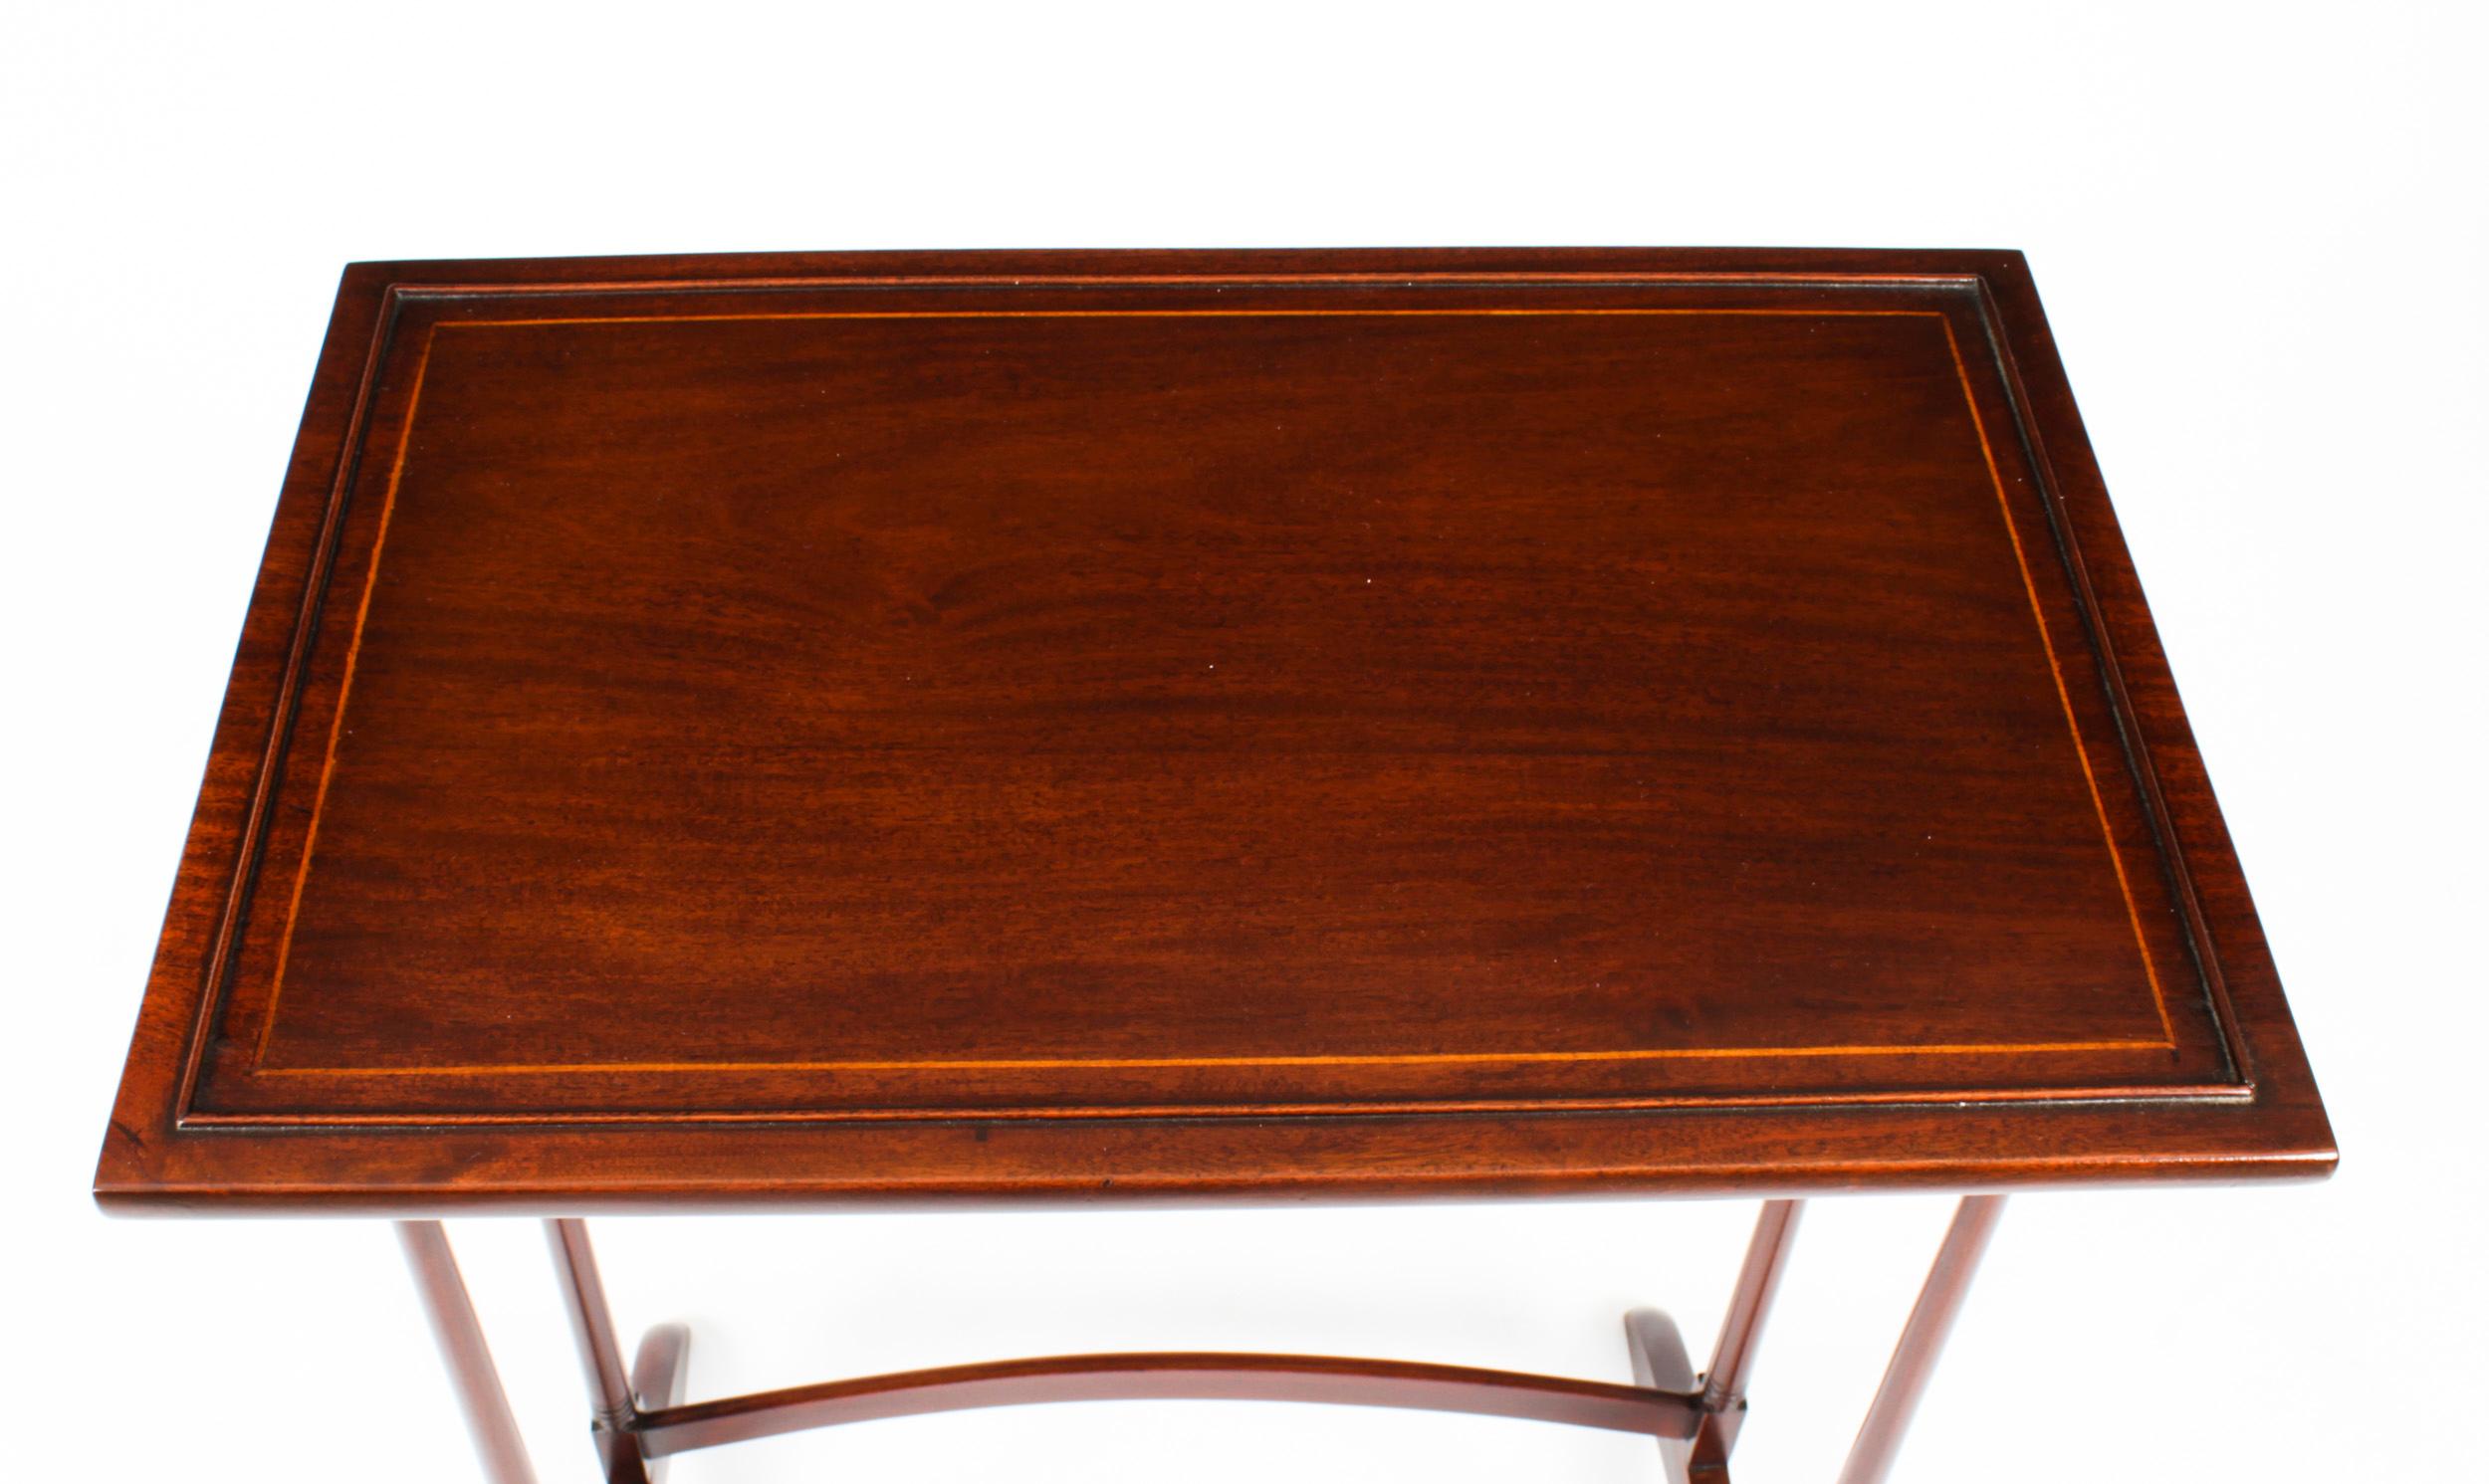 Antique Edwardian Mahogany Nest of Four Tables Early 20th Century For Sale 3